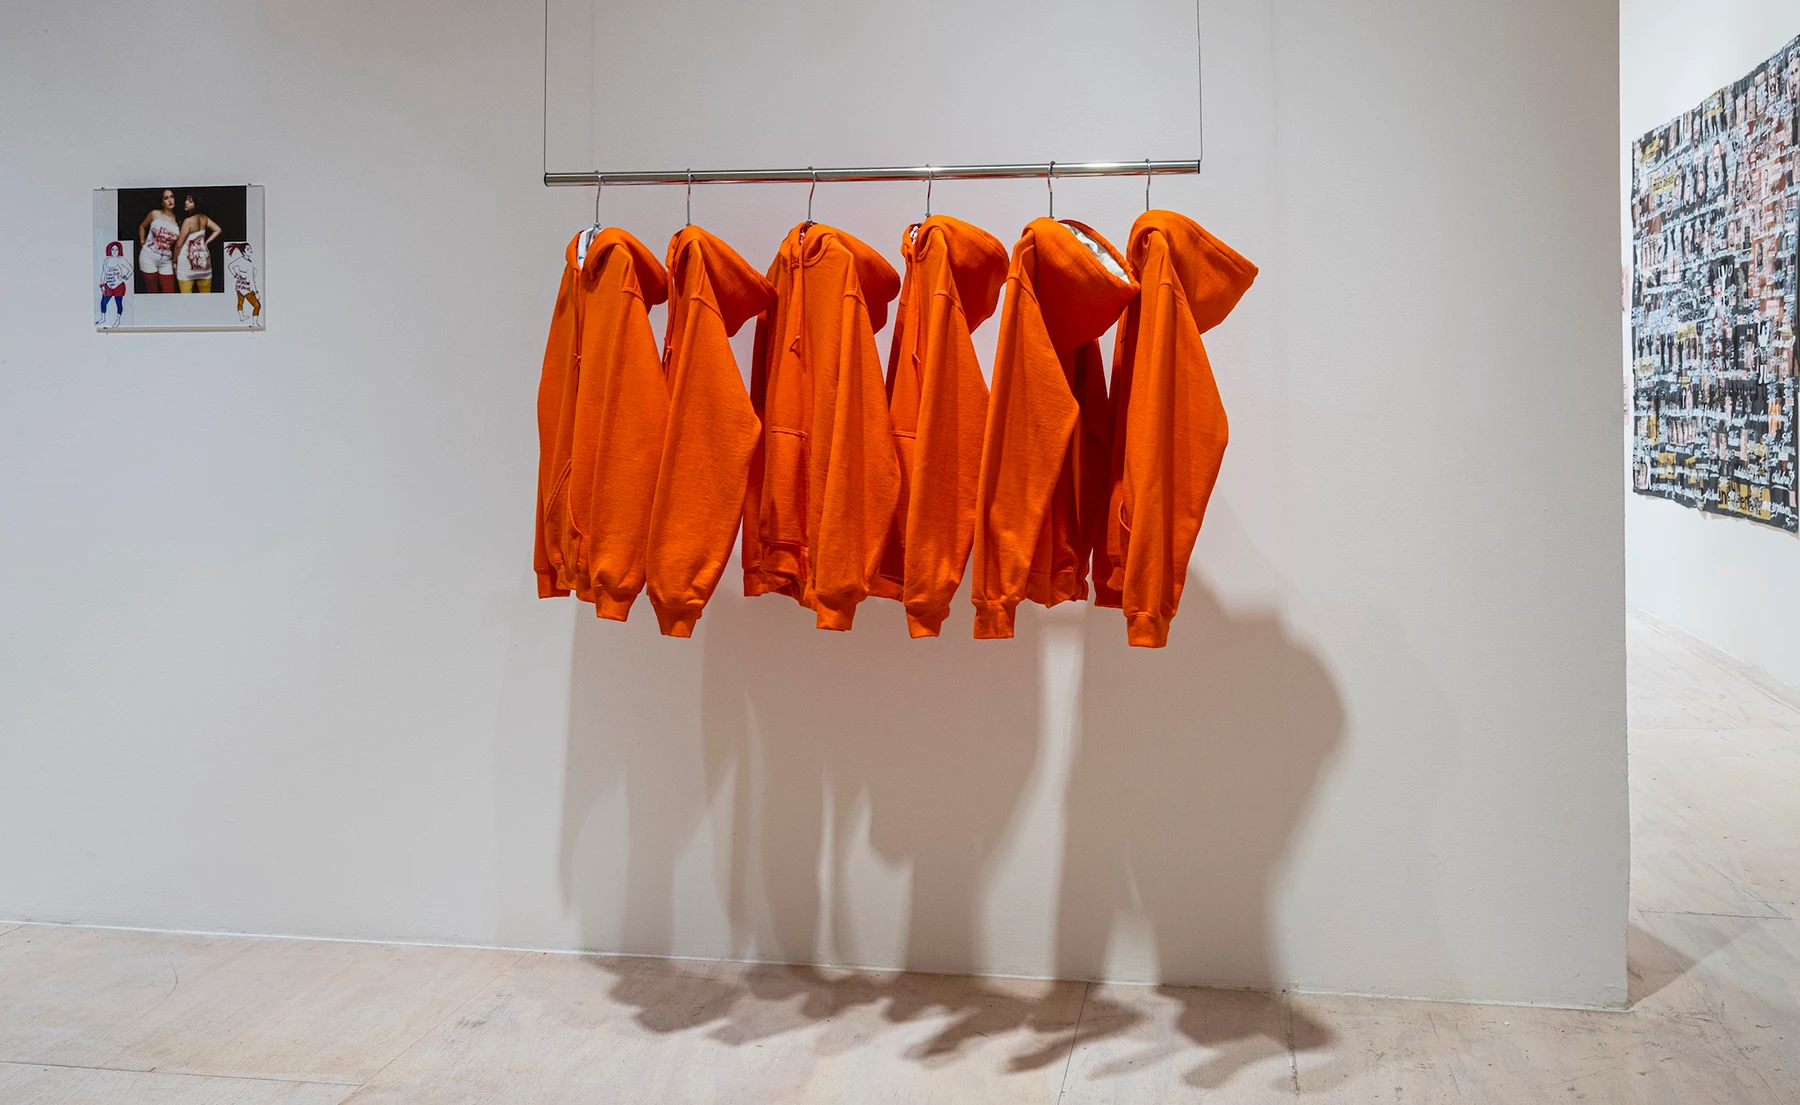 Six orange hooded sweatshirts hand in a gallery on display with other artworks